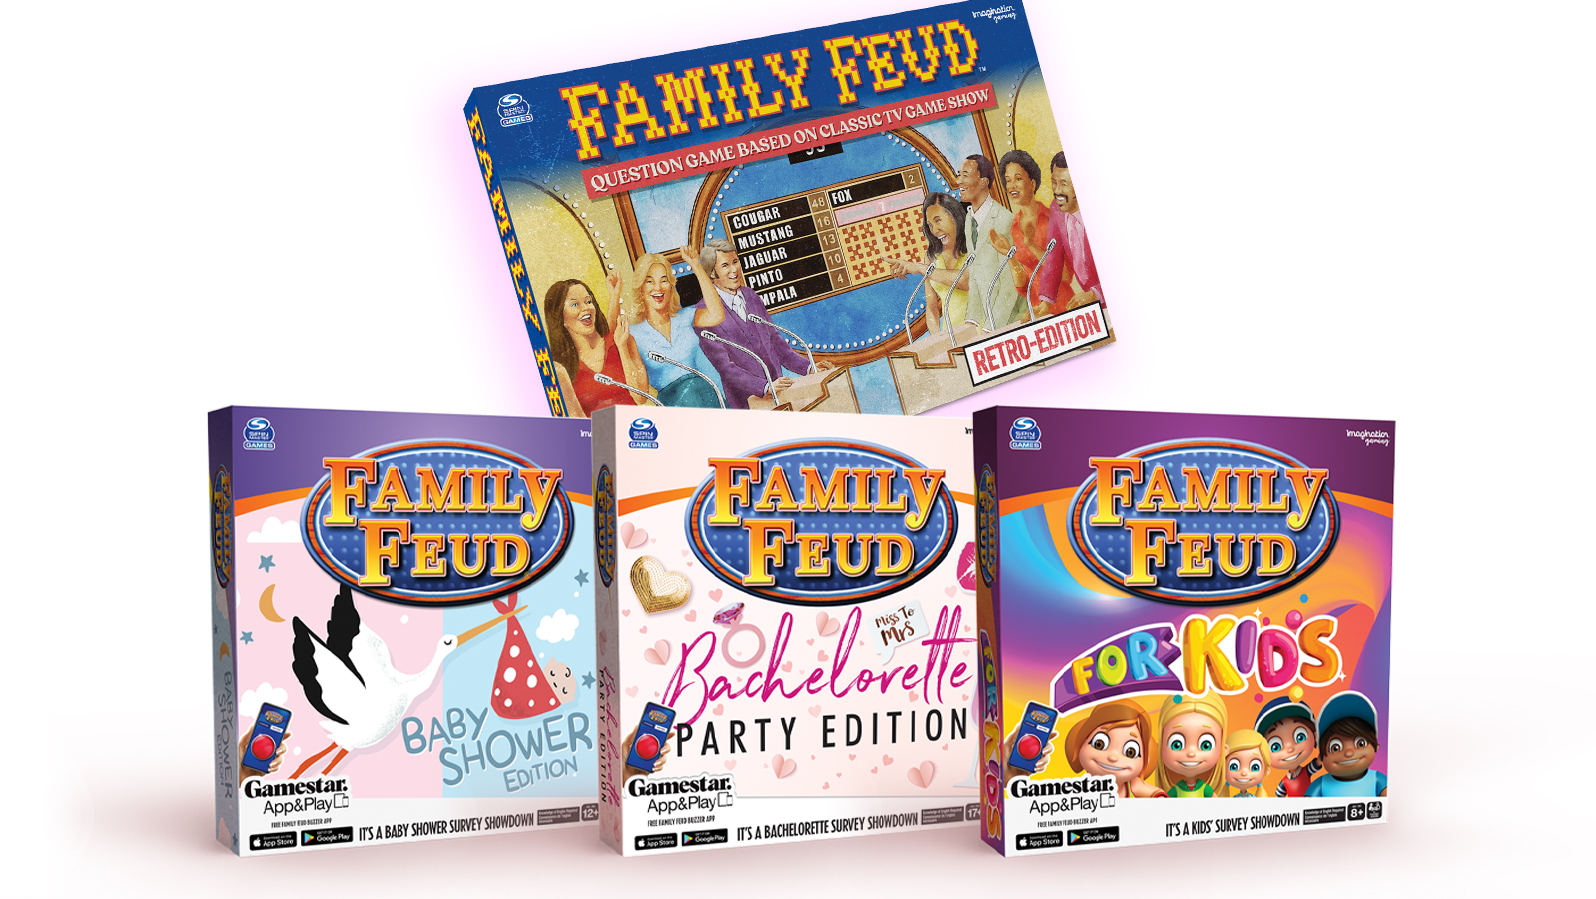 There really is a Family Feud for everyone this holiday season!